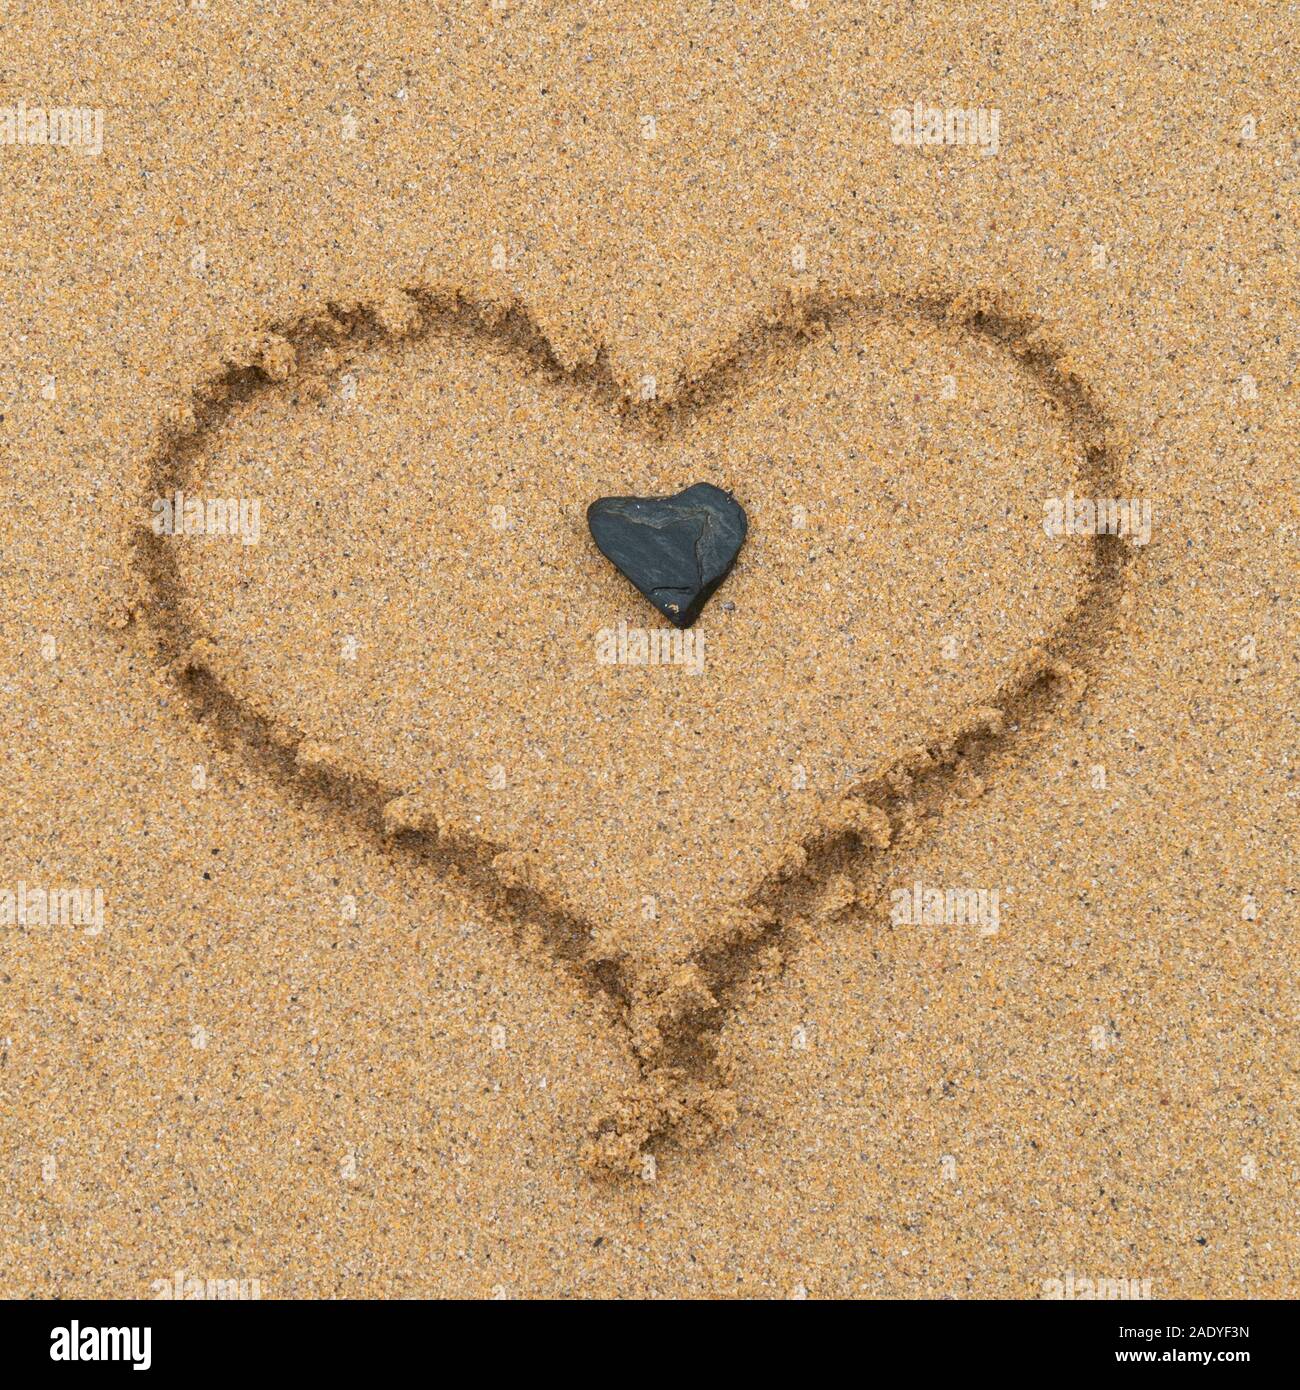 Love heart drawn (by the photographer) in sand with heart shaped pebble in centre on sandy beach, Scotland, UK Stock Photo